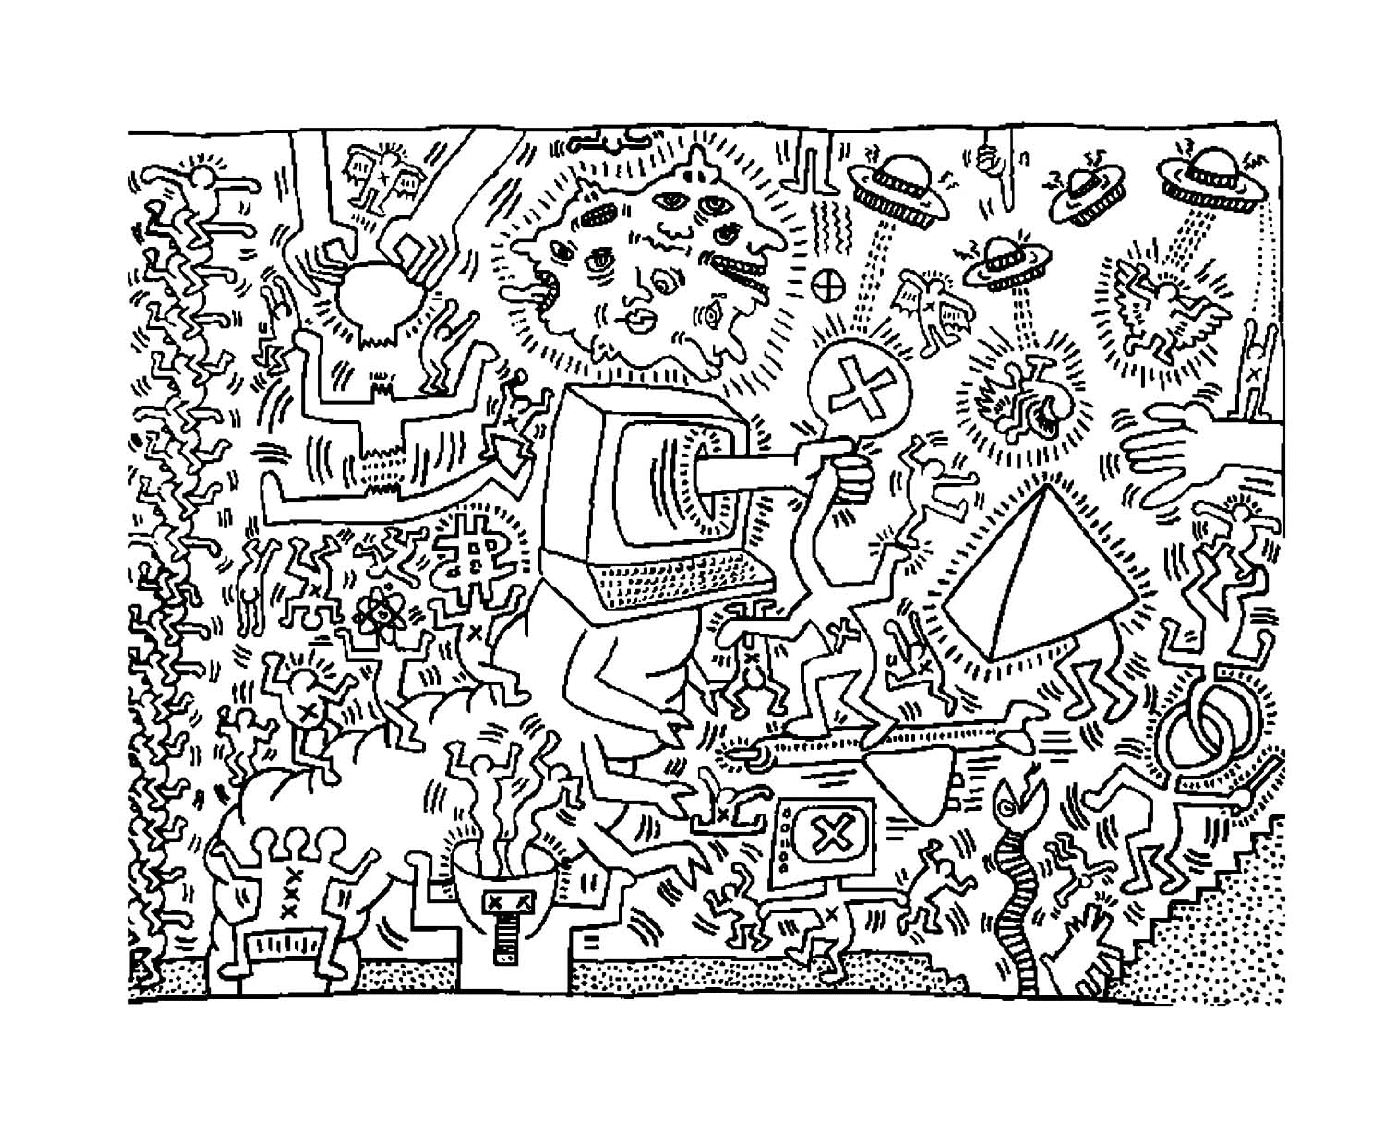  a computer according to Keith Haring 